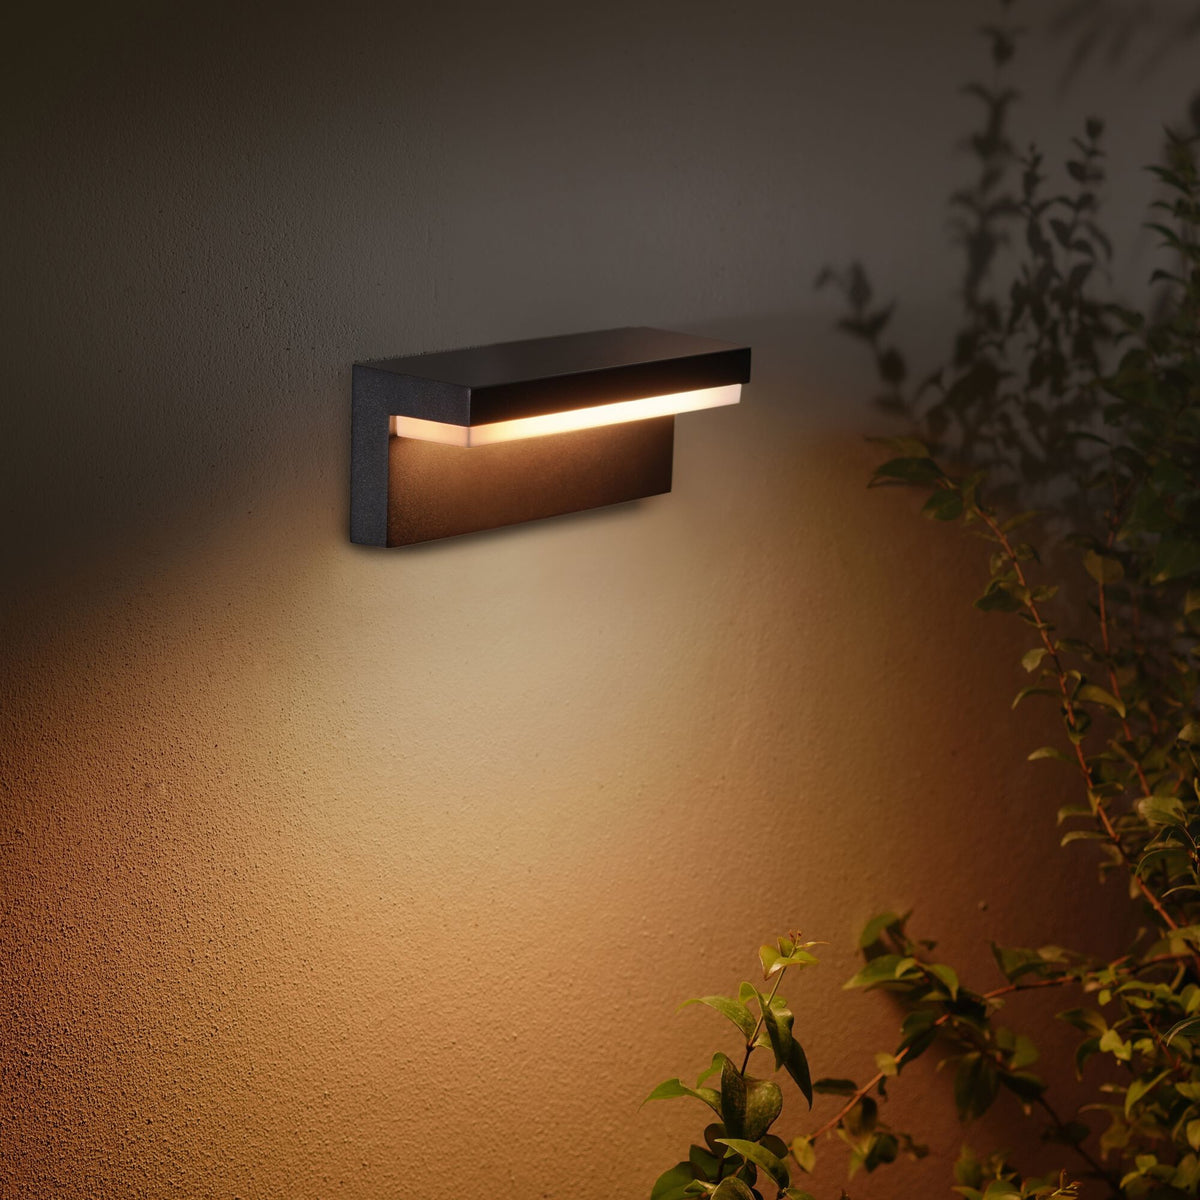 Philips Hue Nyro Outdoor wall light - White and colour ambiance